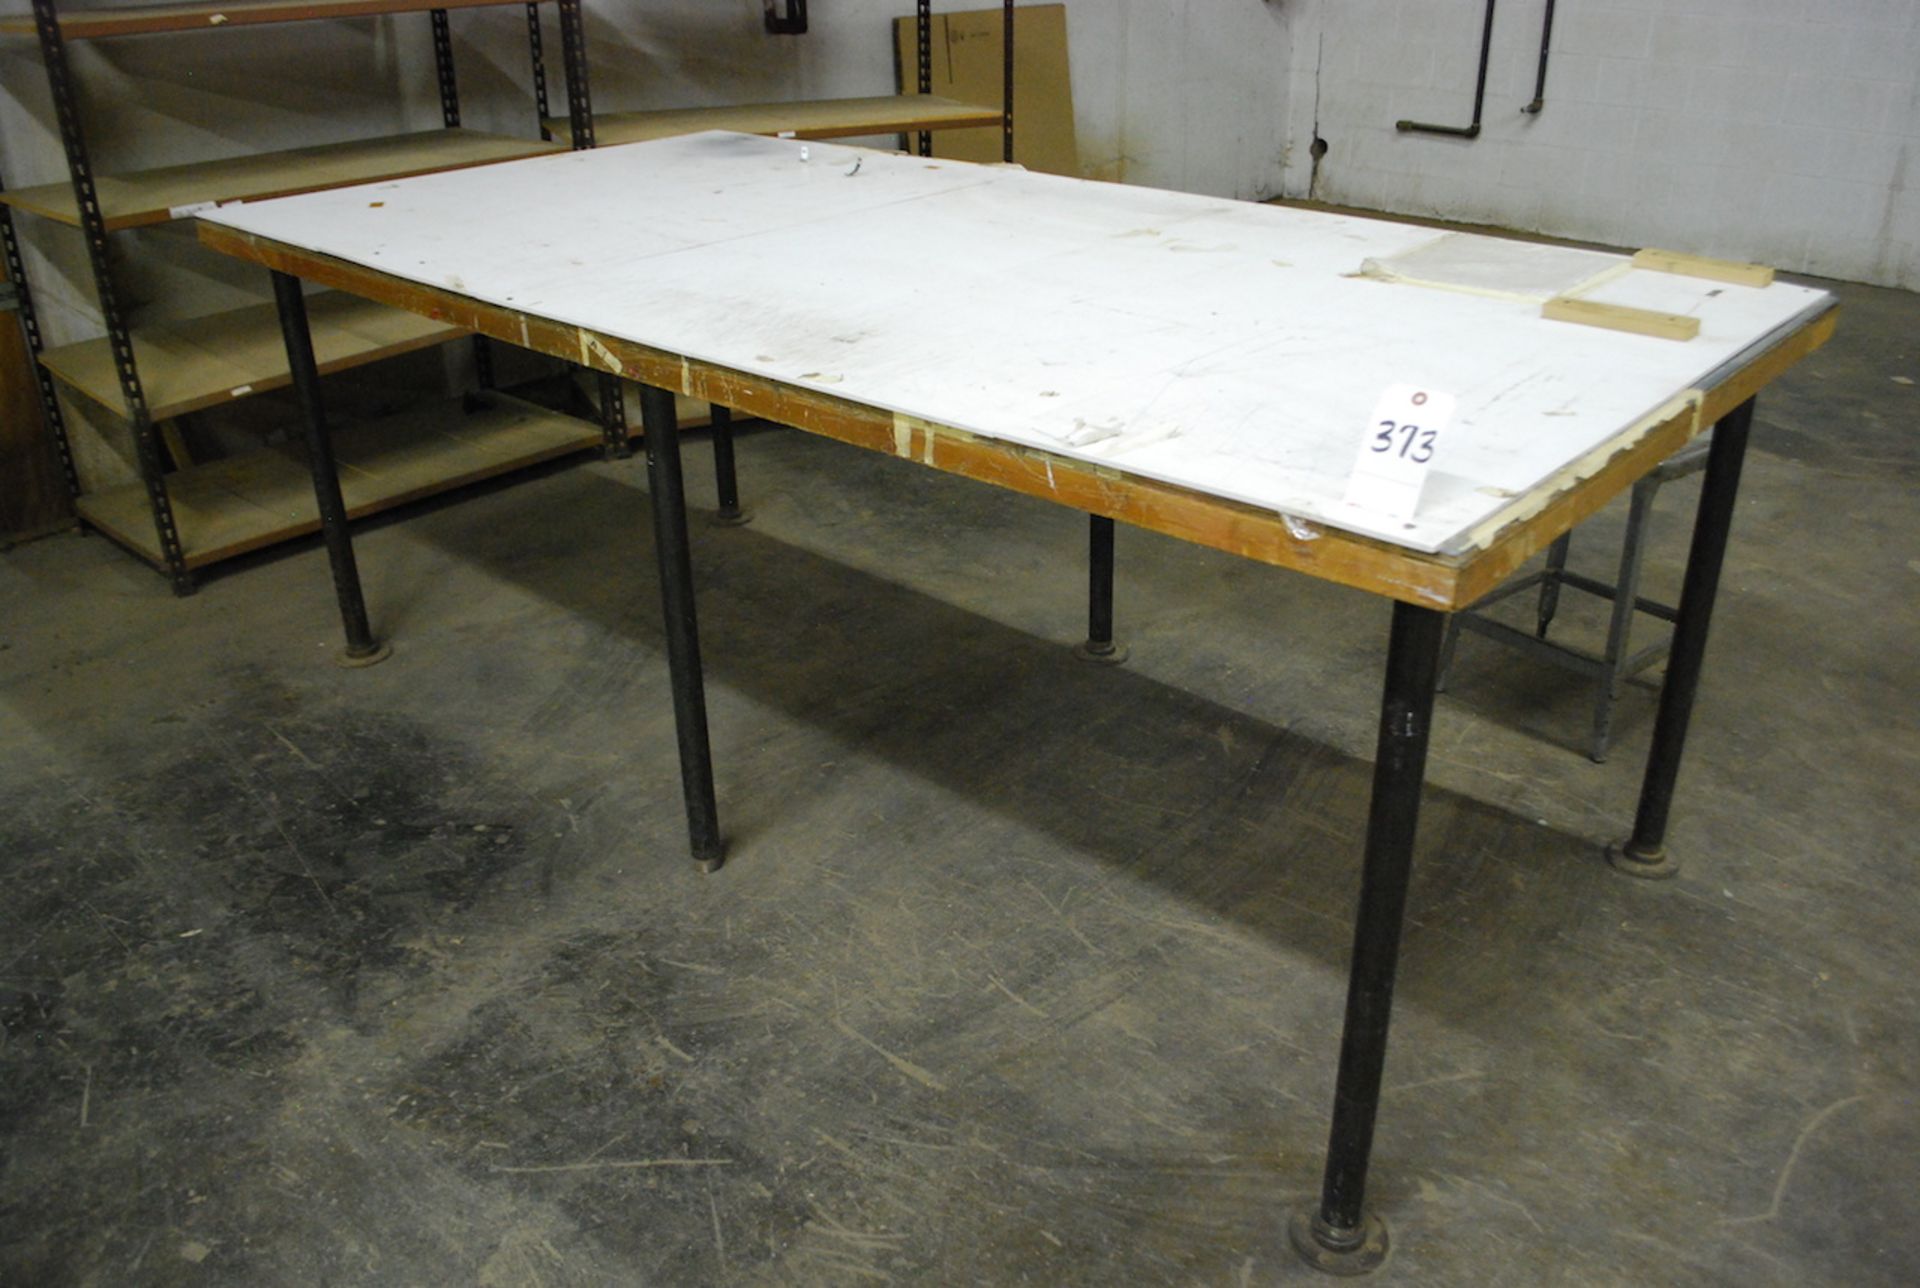 LOT: WOOD TABLES IN AREA